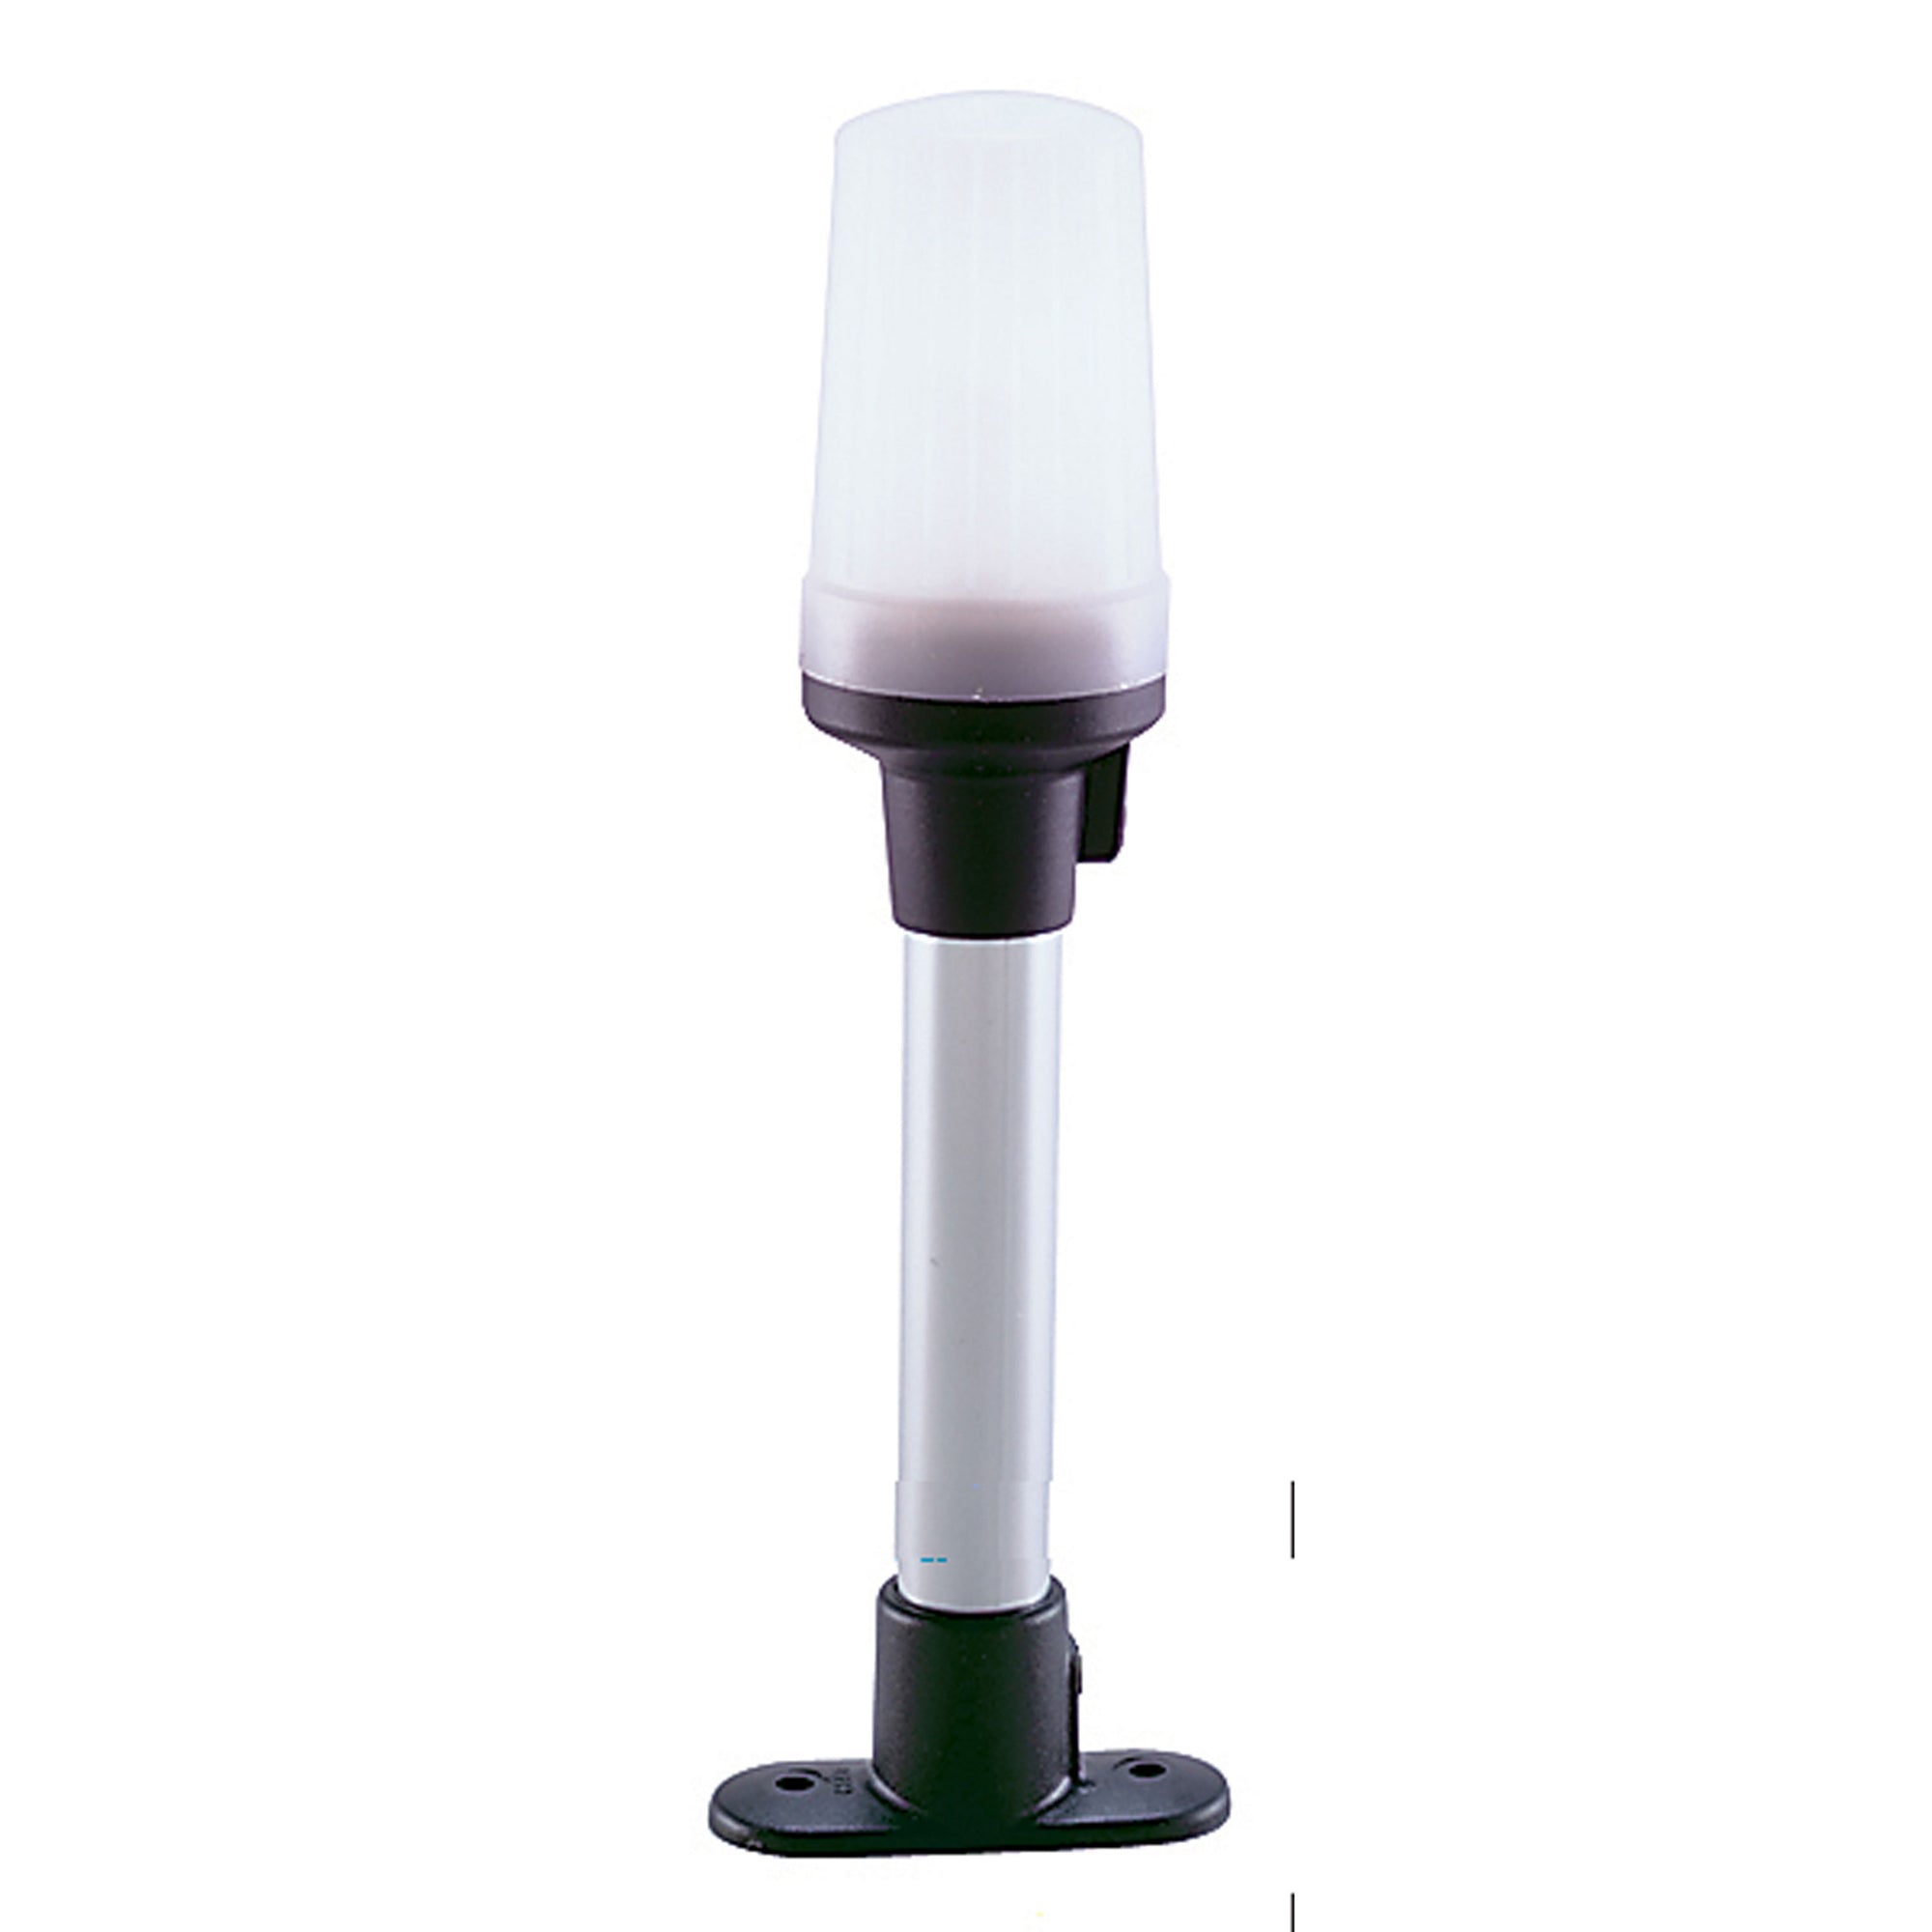 Perko 1301DP0CHR Fixed-Mount White All-Round Light - 8.5" Height with Black Polymer Base